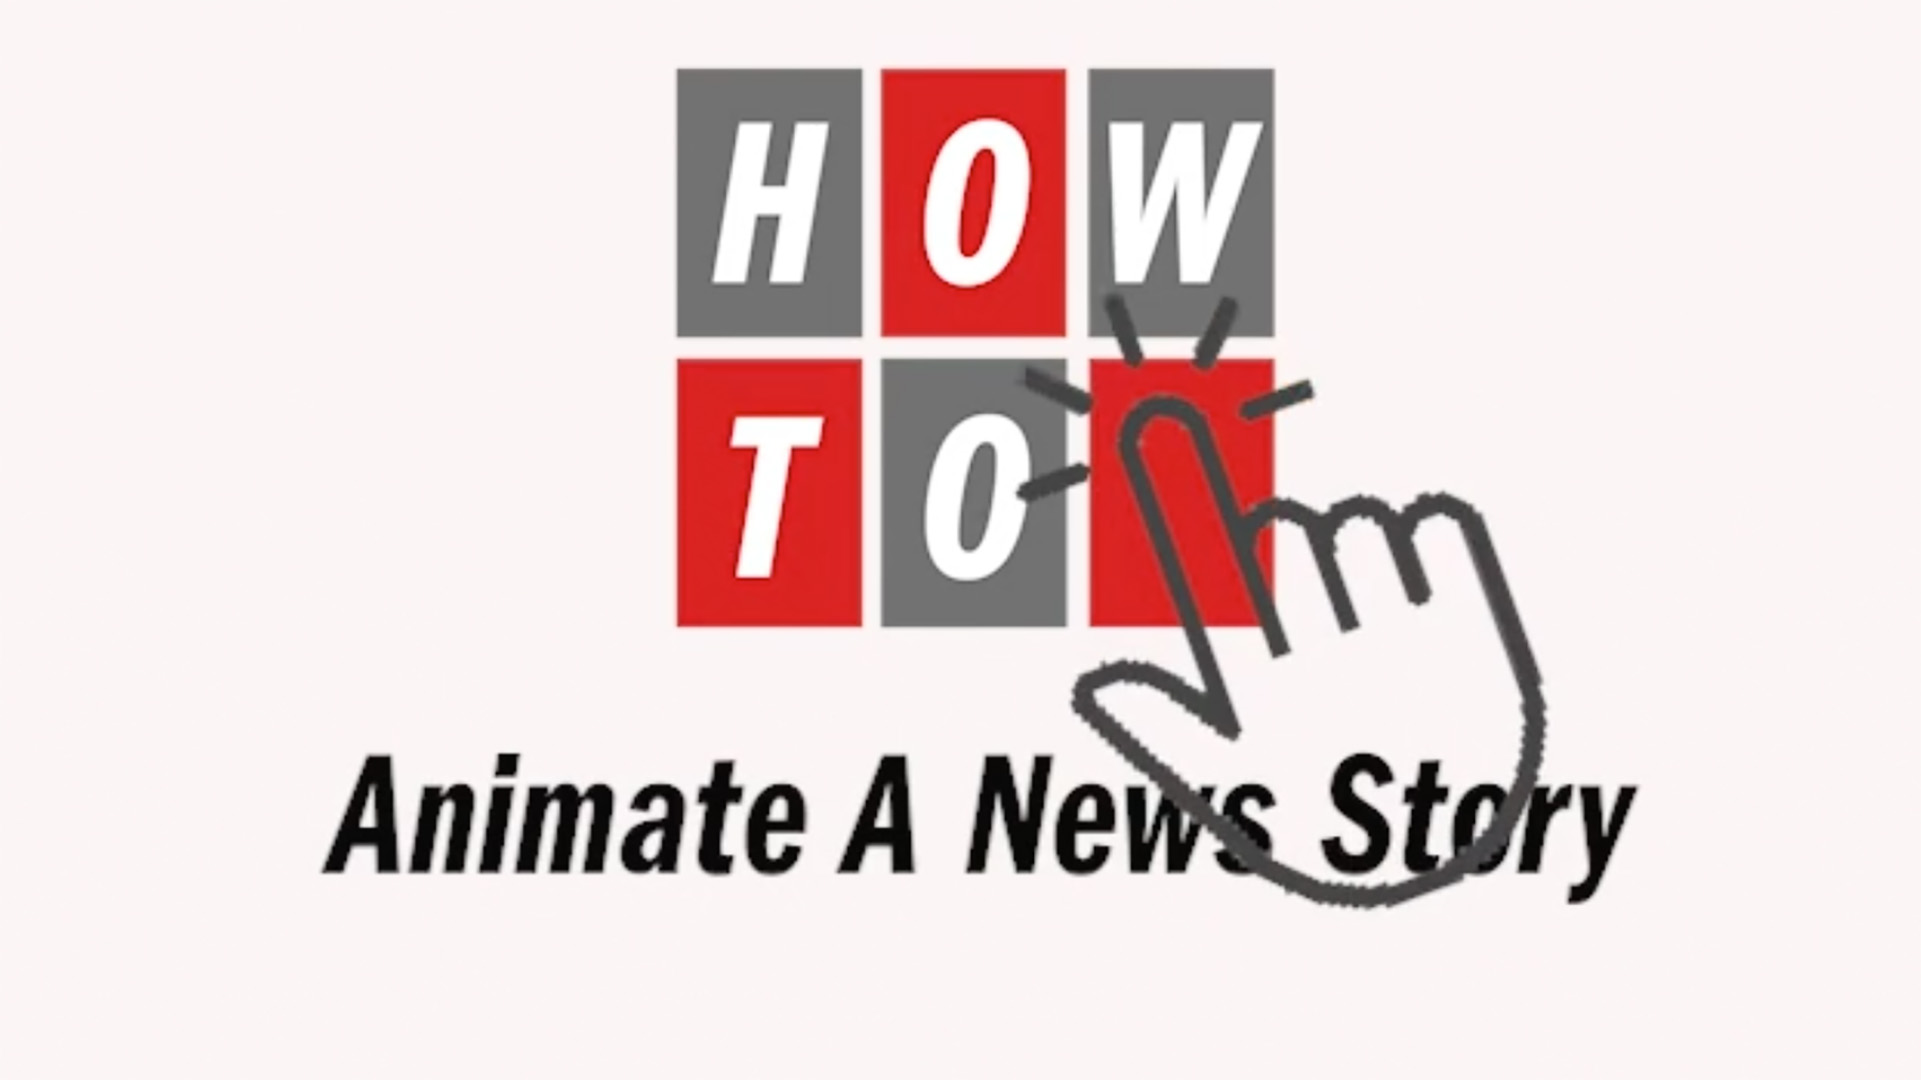 New ‘How To’ original video series features advice from TV experts